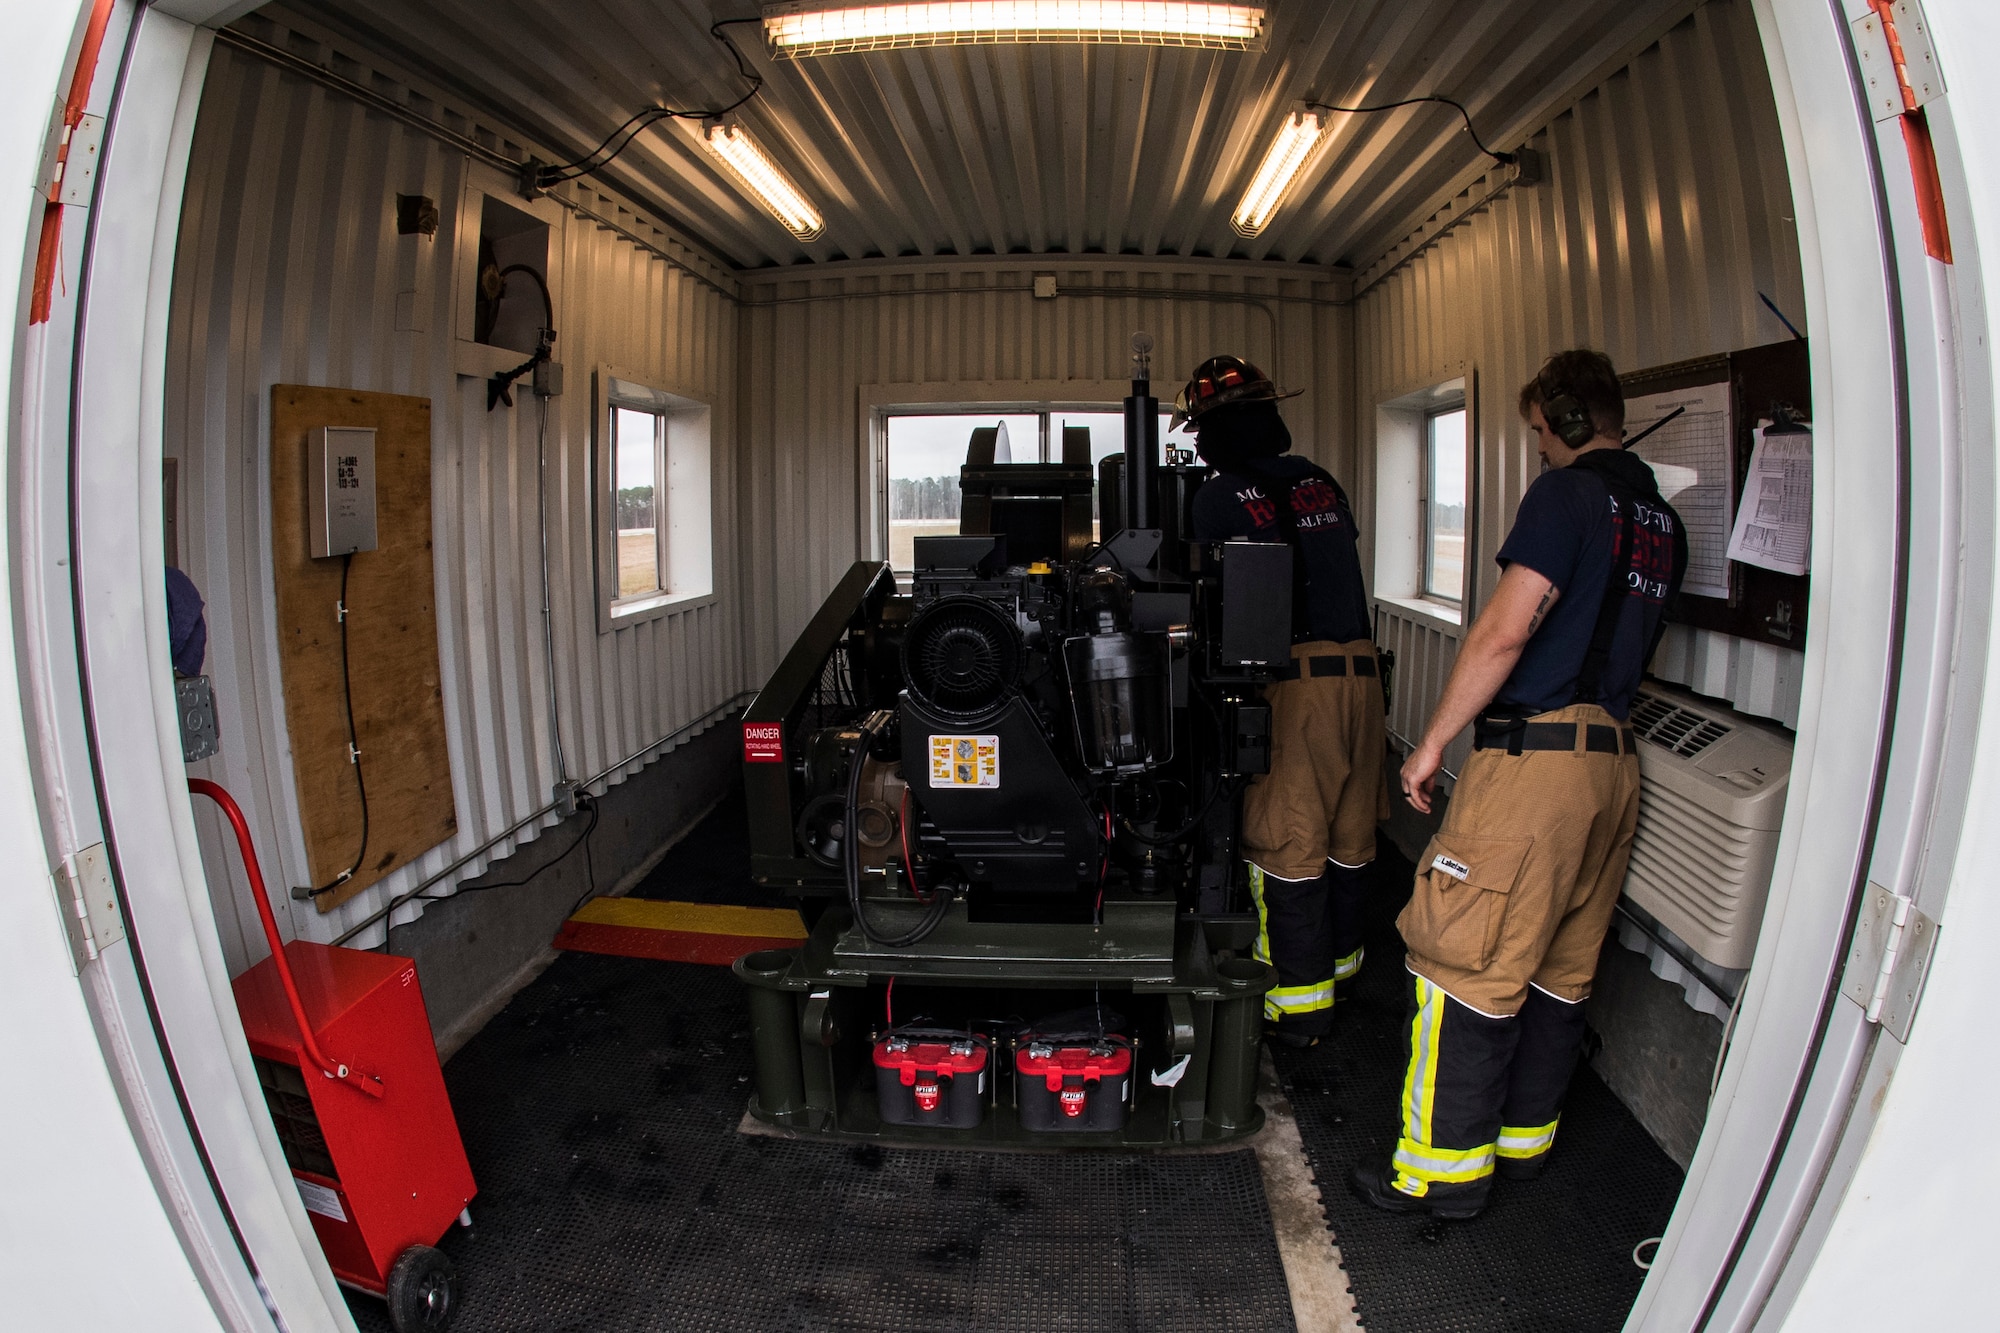 Airmen from the 23d Civil Engineer Squadron fire department prepare to release an F-15C Eagle from an arresting system, Dec. 19, 2017, at Moody Air Force Base, Ga. The BAK-12 arresting system is used on the runway to slow down fighter aircraft in emergency situations. The previous beam has been on Moody’s flightline since 1998, but under new guidelines will now be replaced every 10 years. (U.S. Air Force photo by Senior Airman Janiqua P. Robinson)